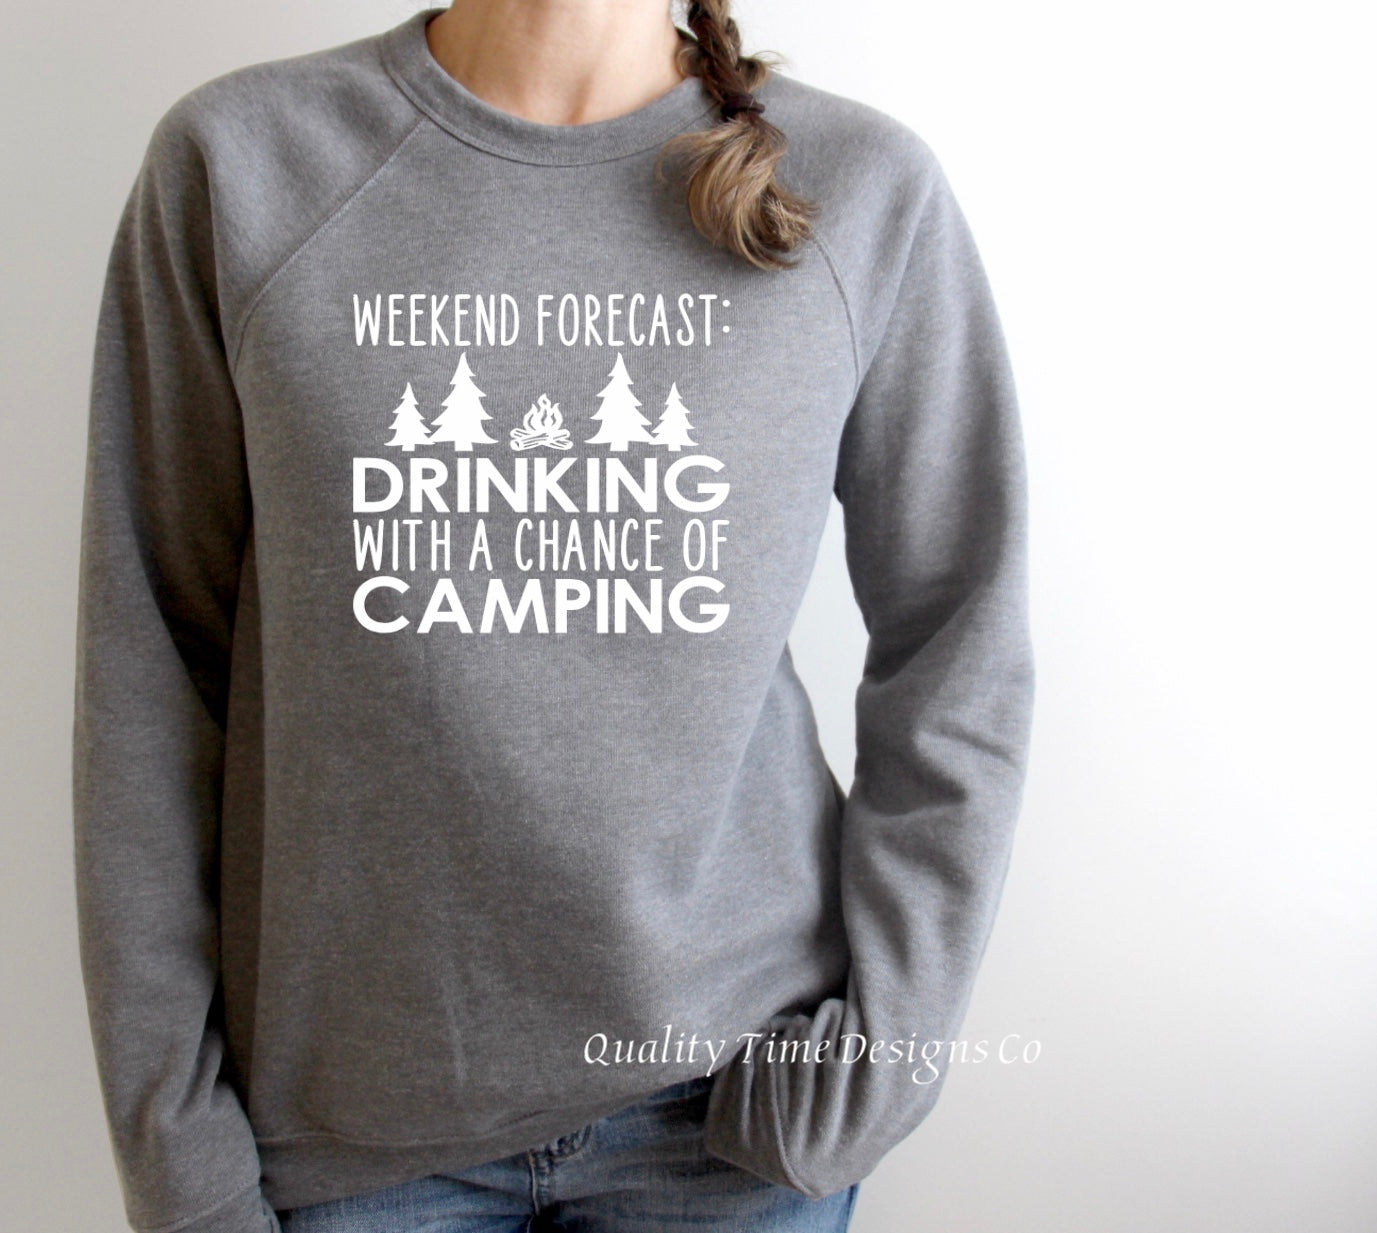 Weekend Forecast Drinking with a Chance of Camping sweatshirt 